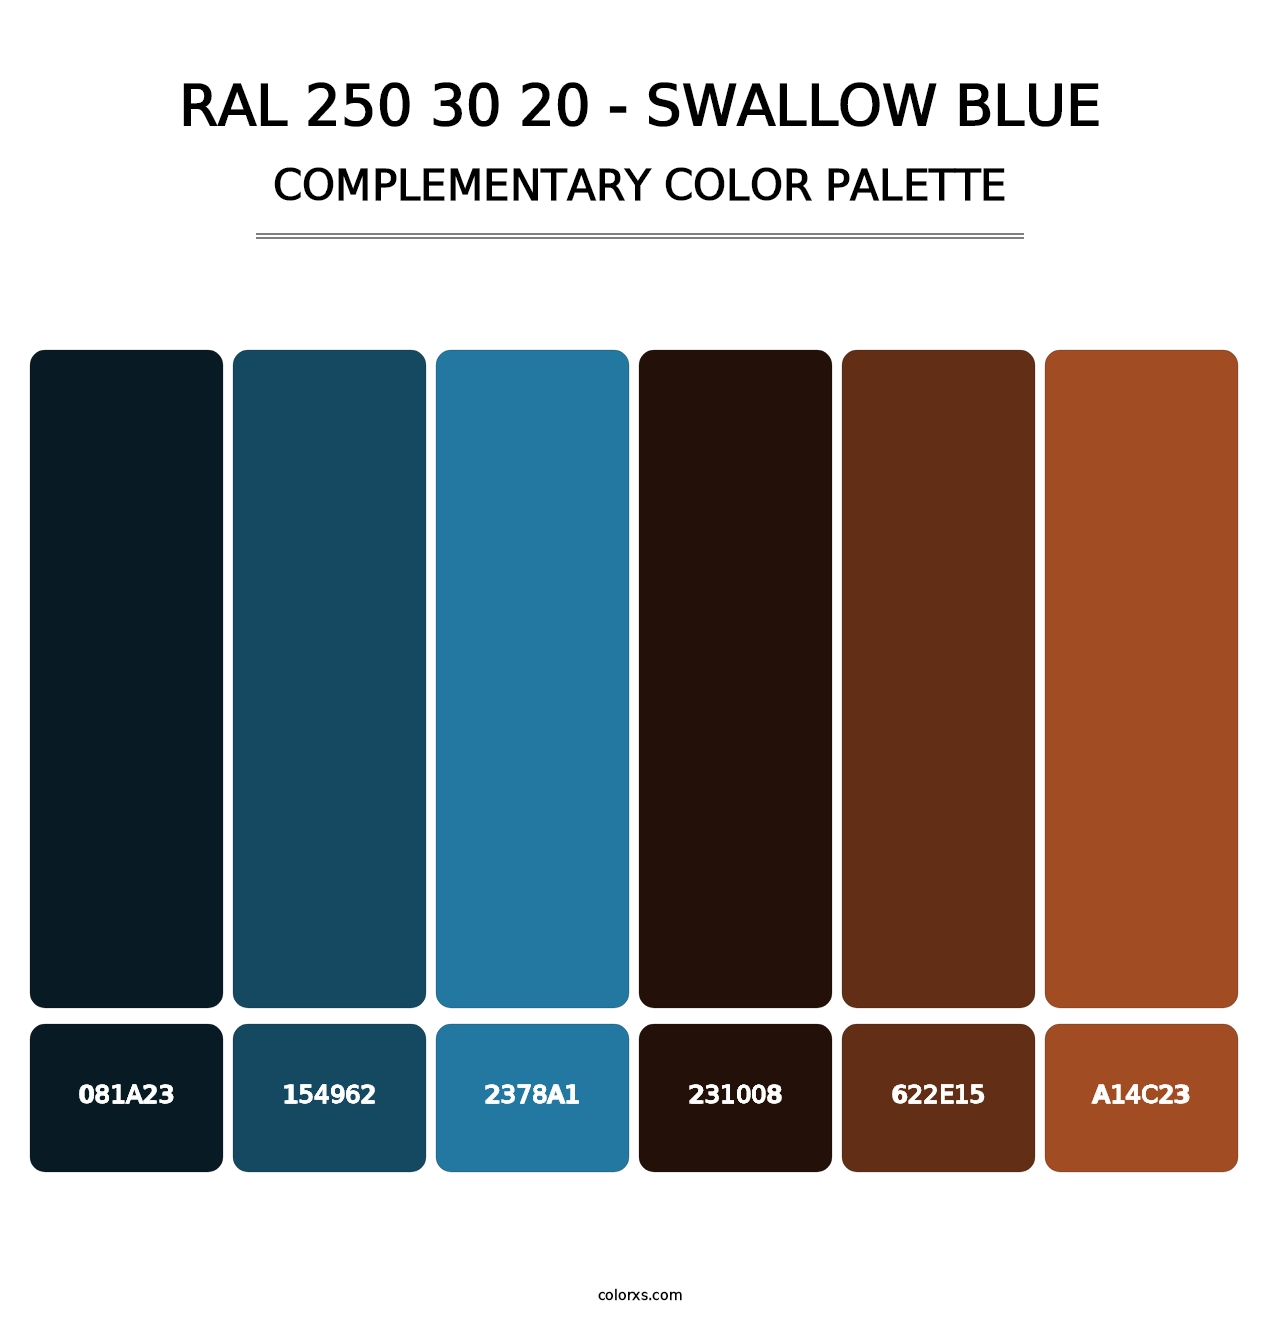 RAL 250 30 20 - Swallow Blue - Complementary Color Palette